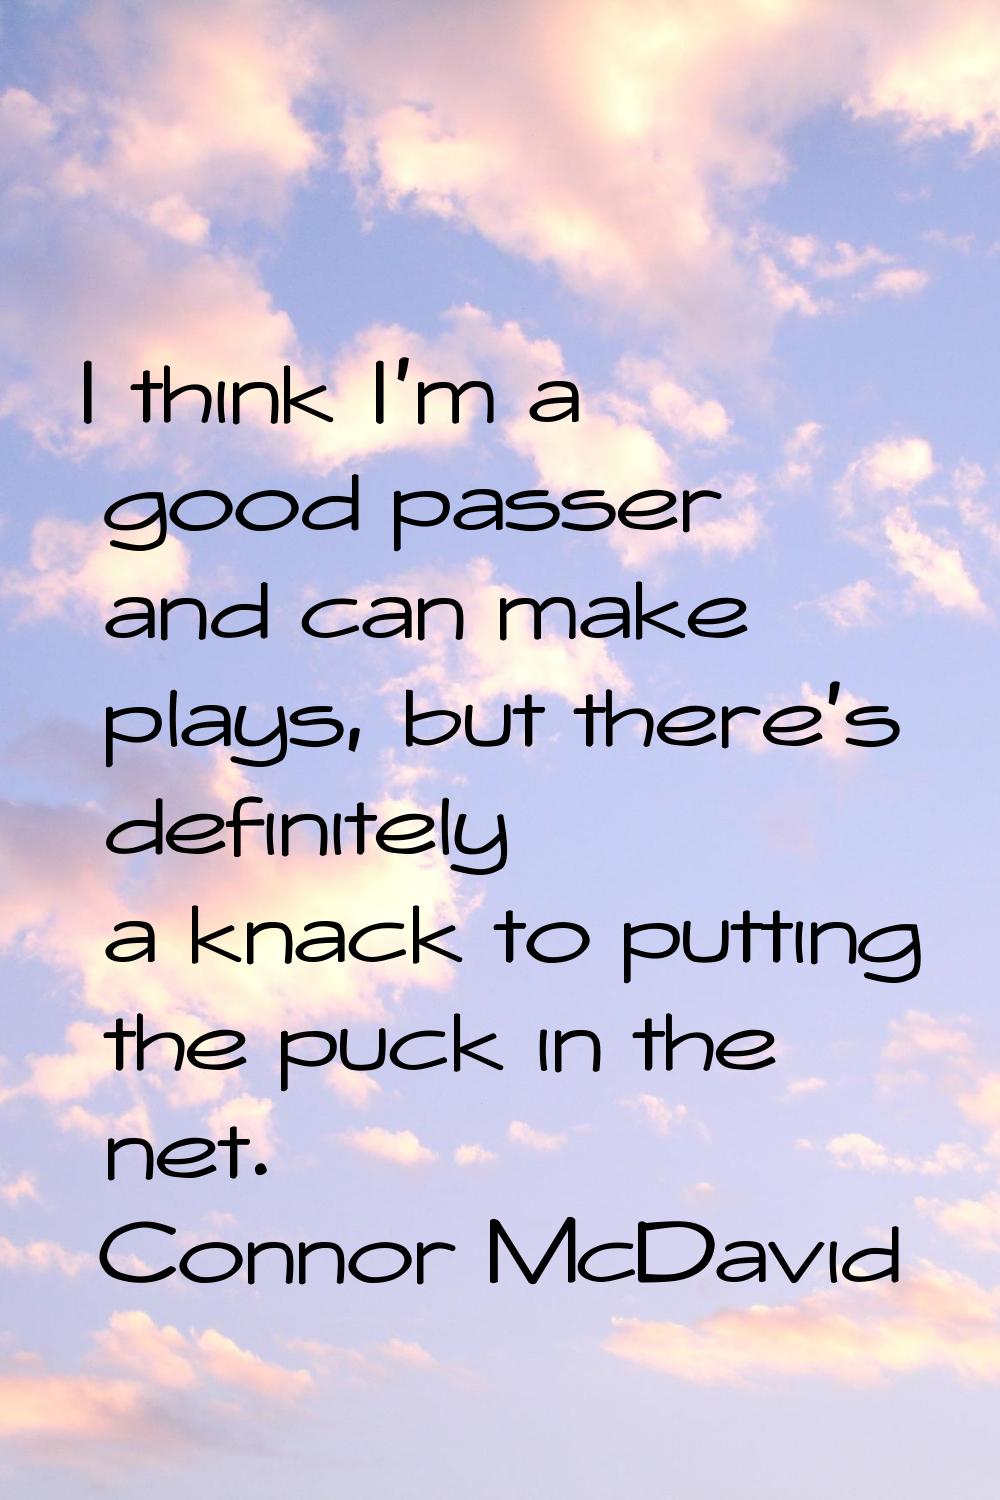 I think I'm a good passer and can make plays, but there's definitely a knack to putting the puck in